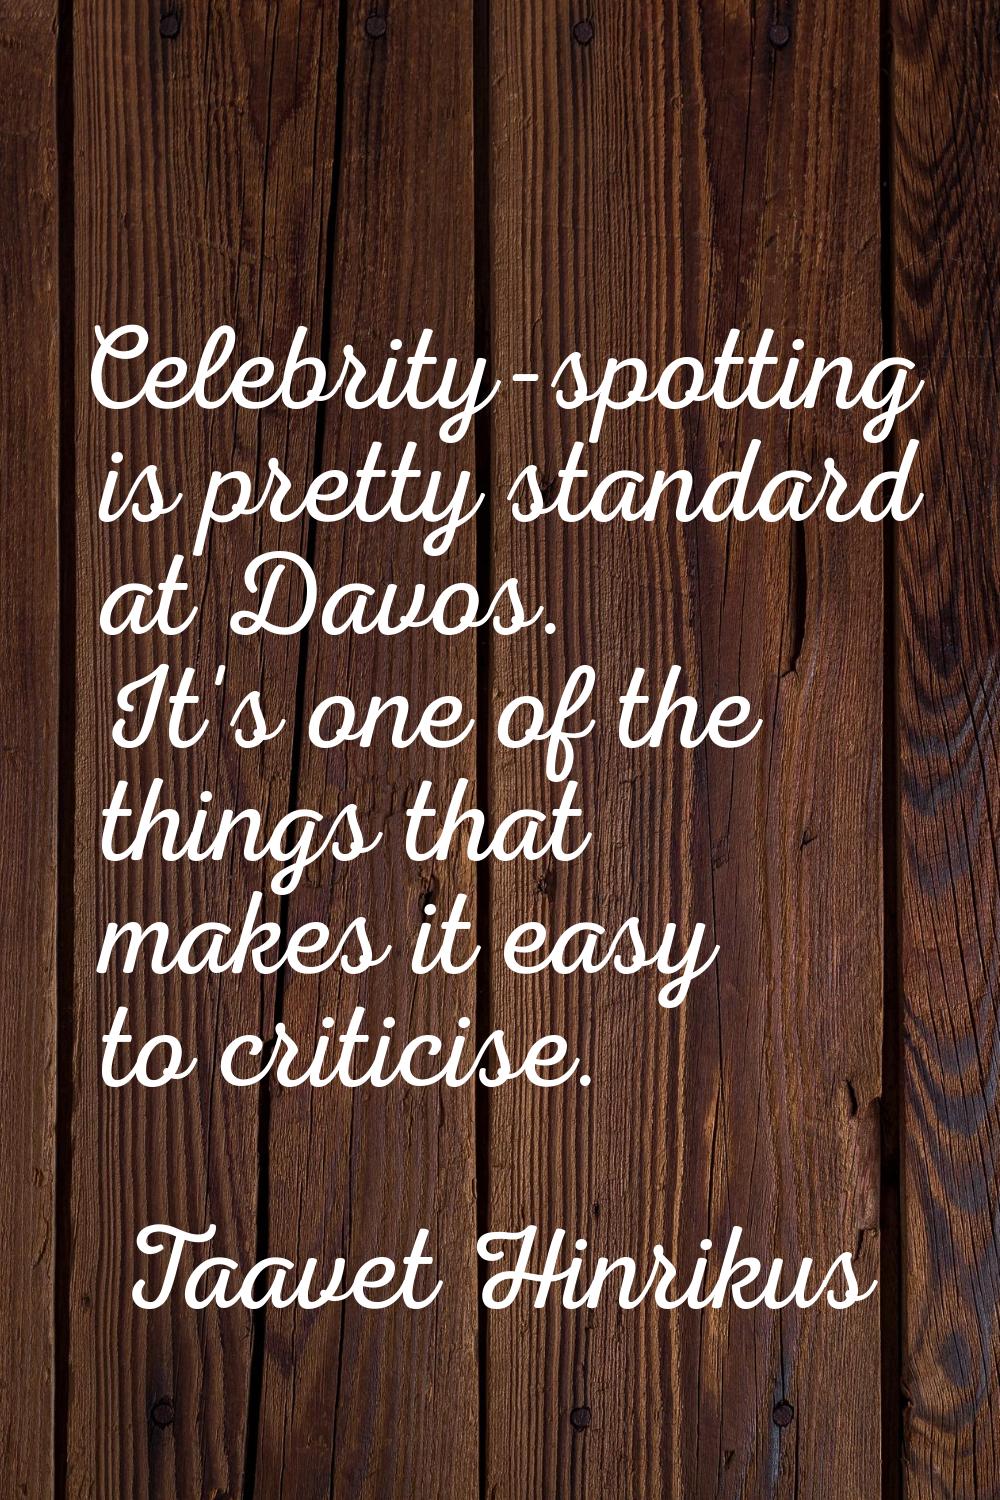 Celebrity-spotting is pretty standard at Davos. It's one of the things that makes it easy to critic